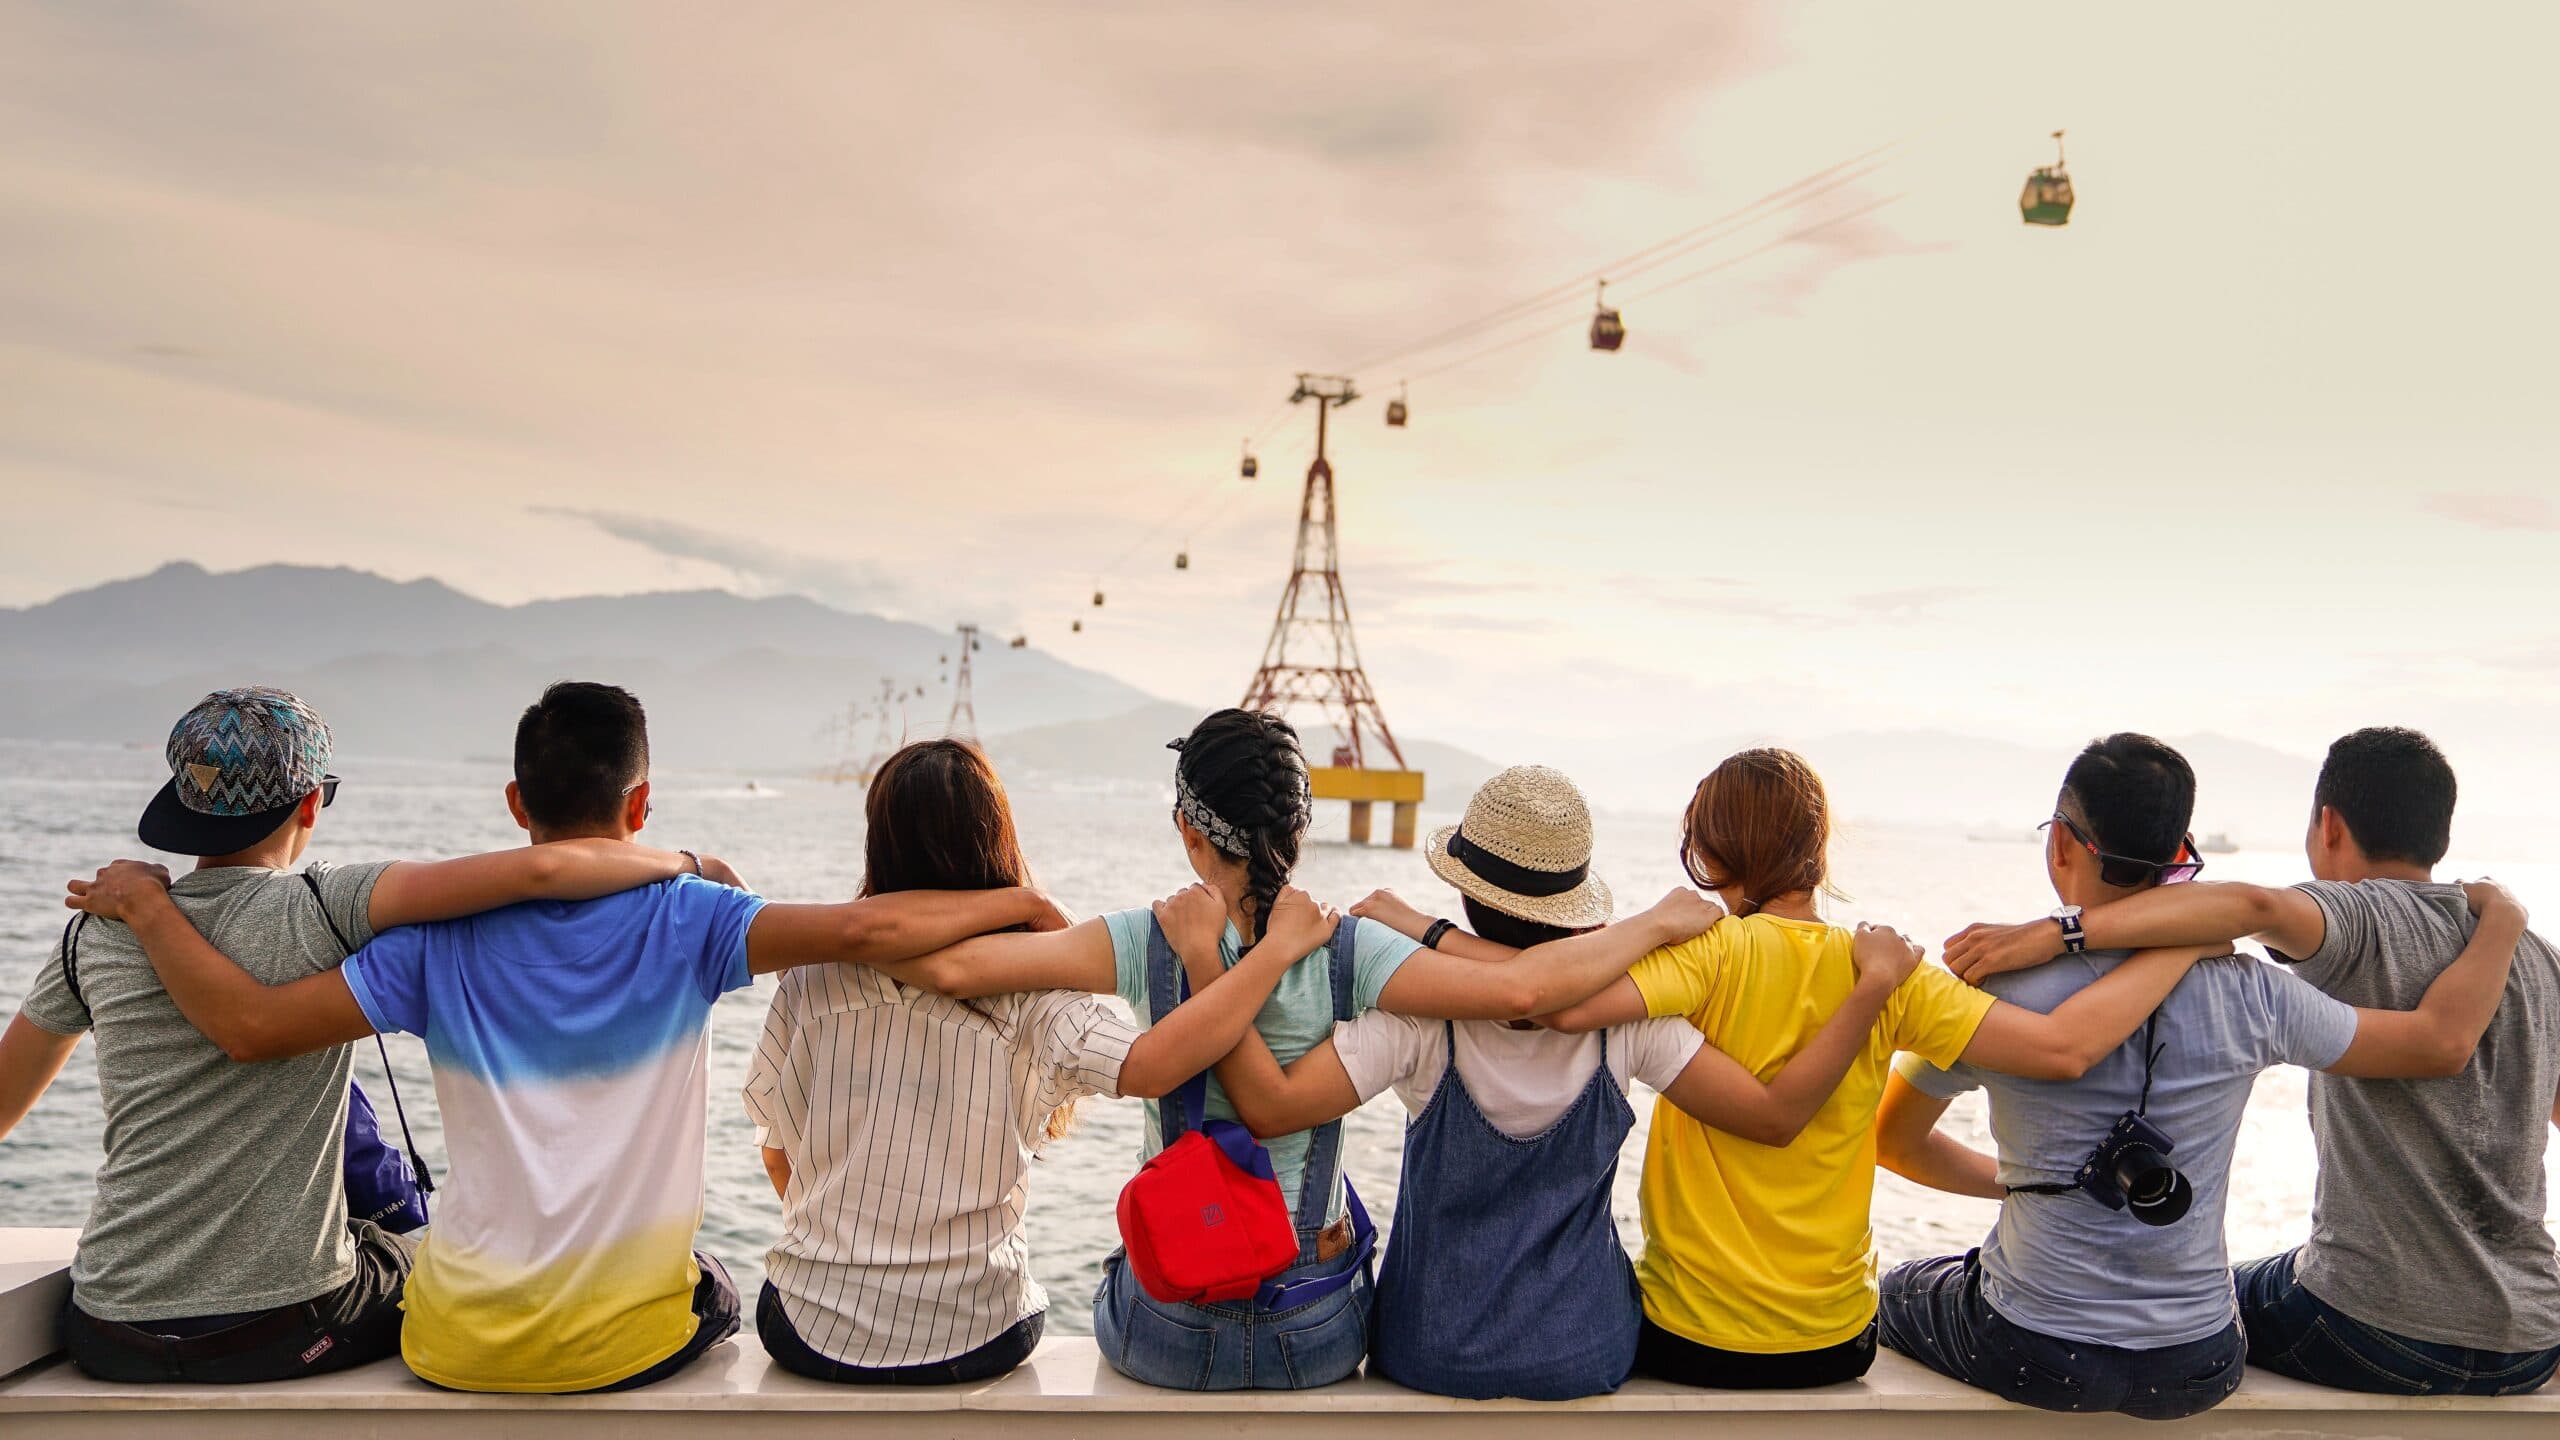 A group of people sit with their arms around each other, looking at a sunset.